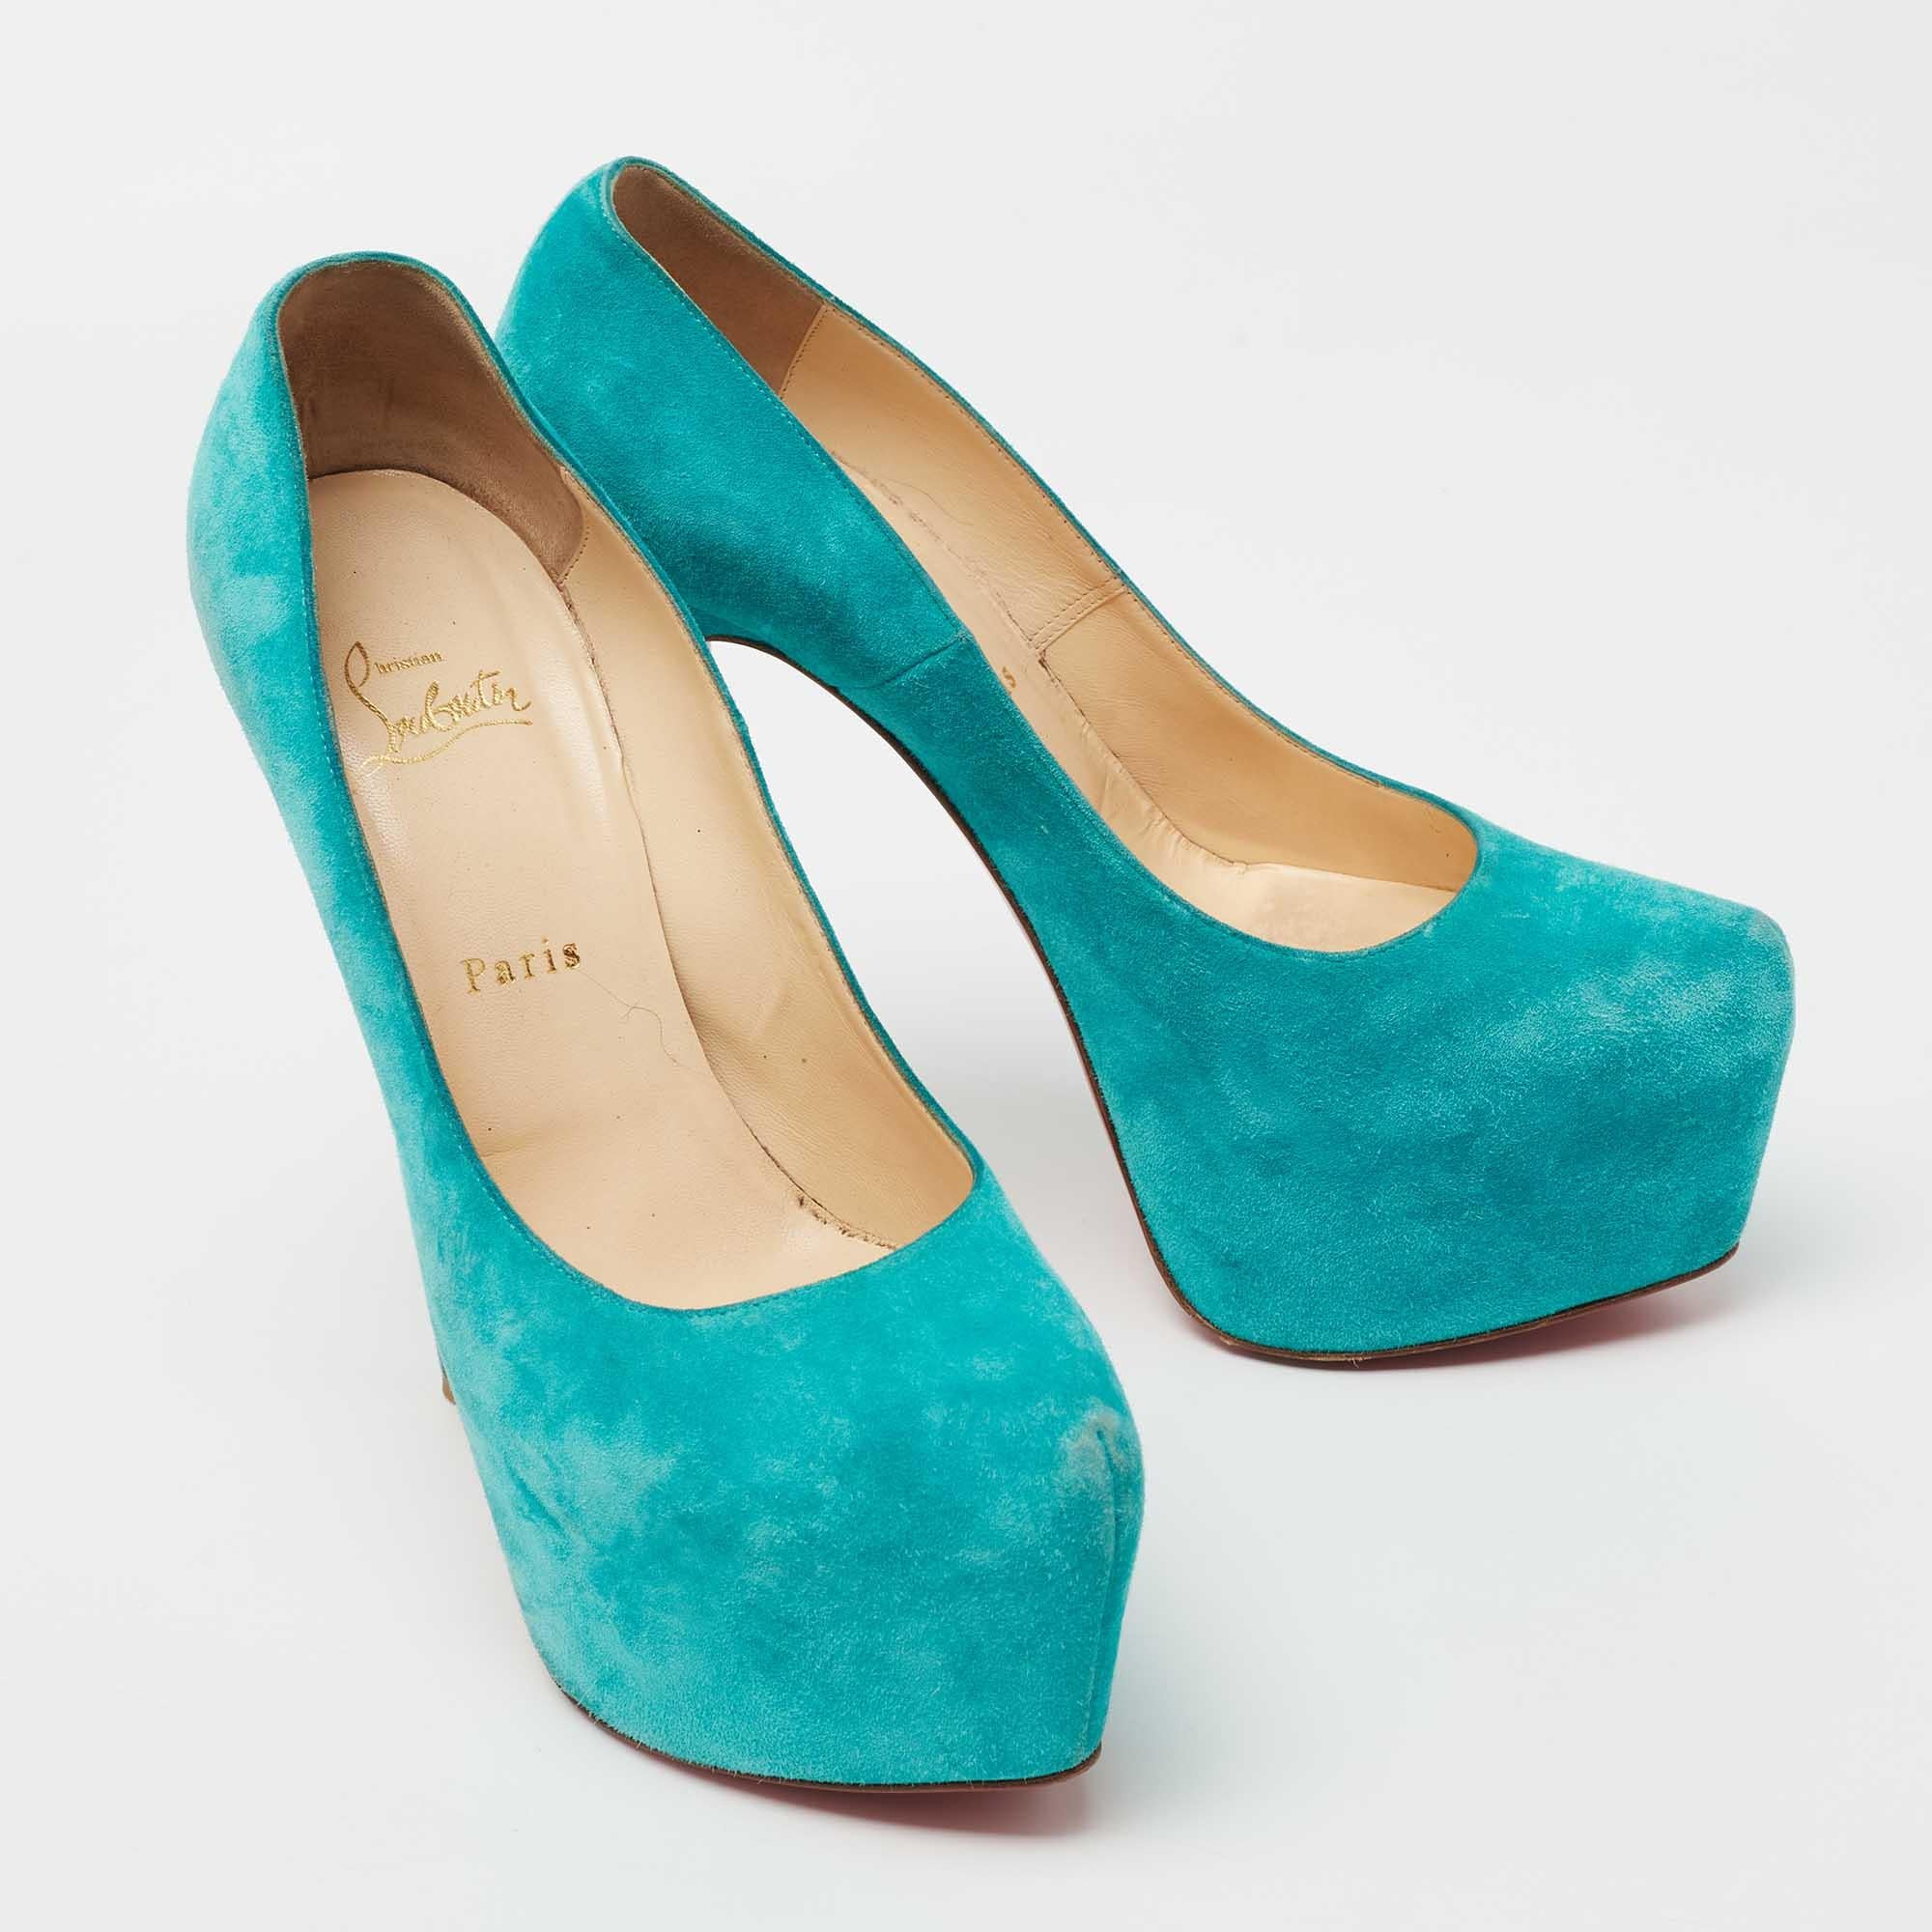 Christian Louboutin Turquoise Blue Suede Daffodile Platform Pumps Size 40 For Sale 2